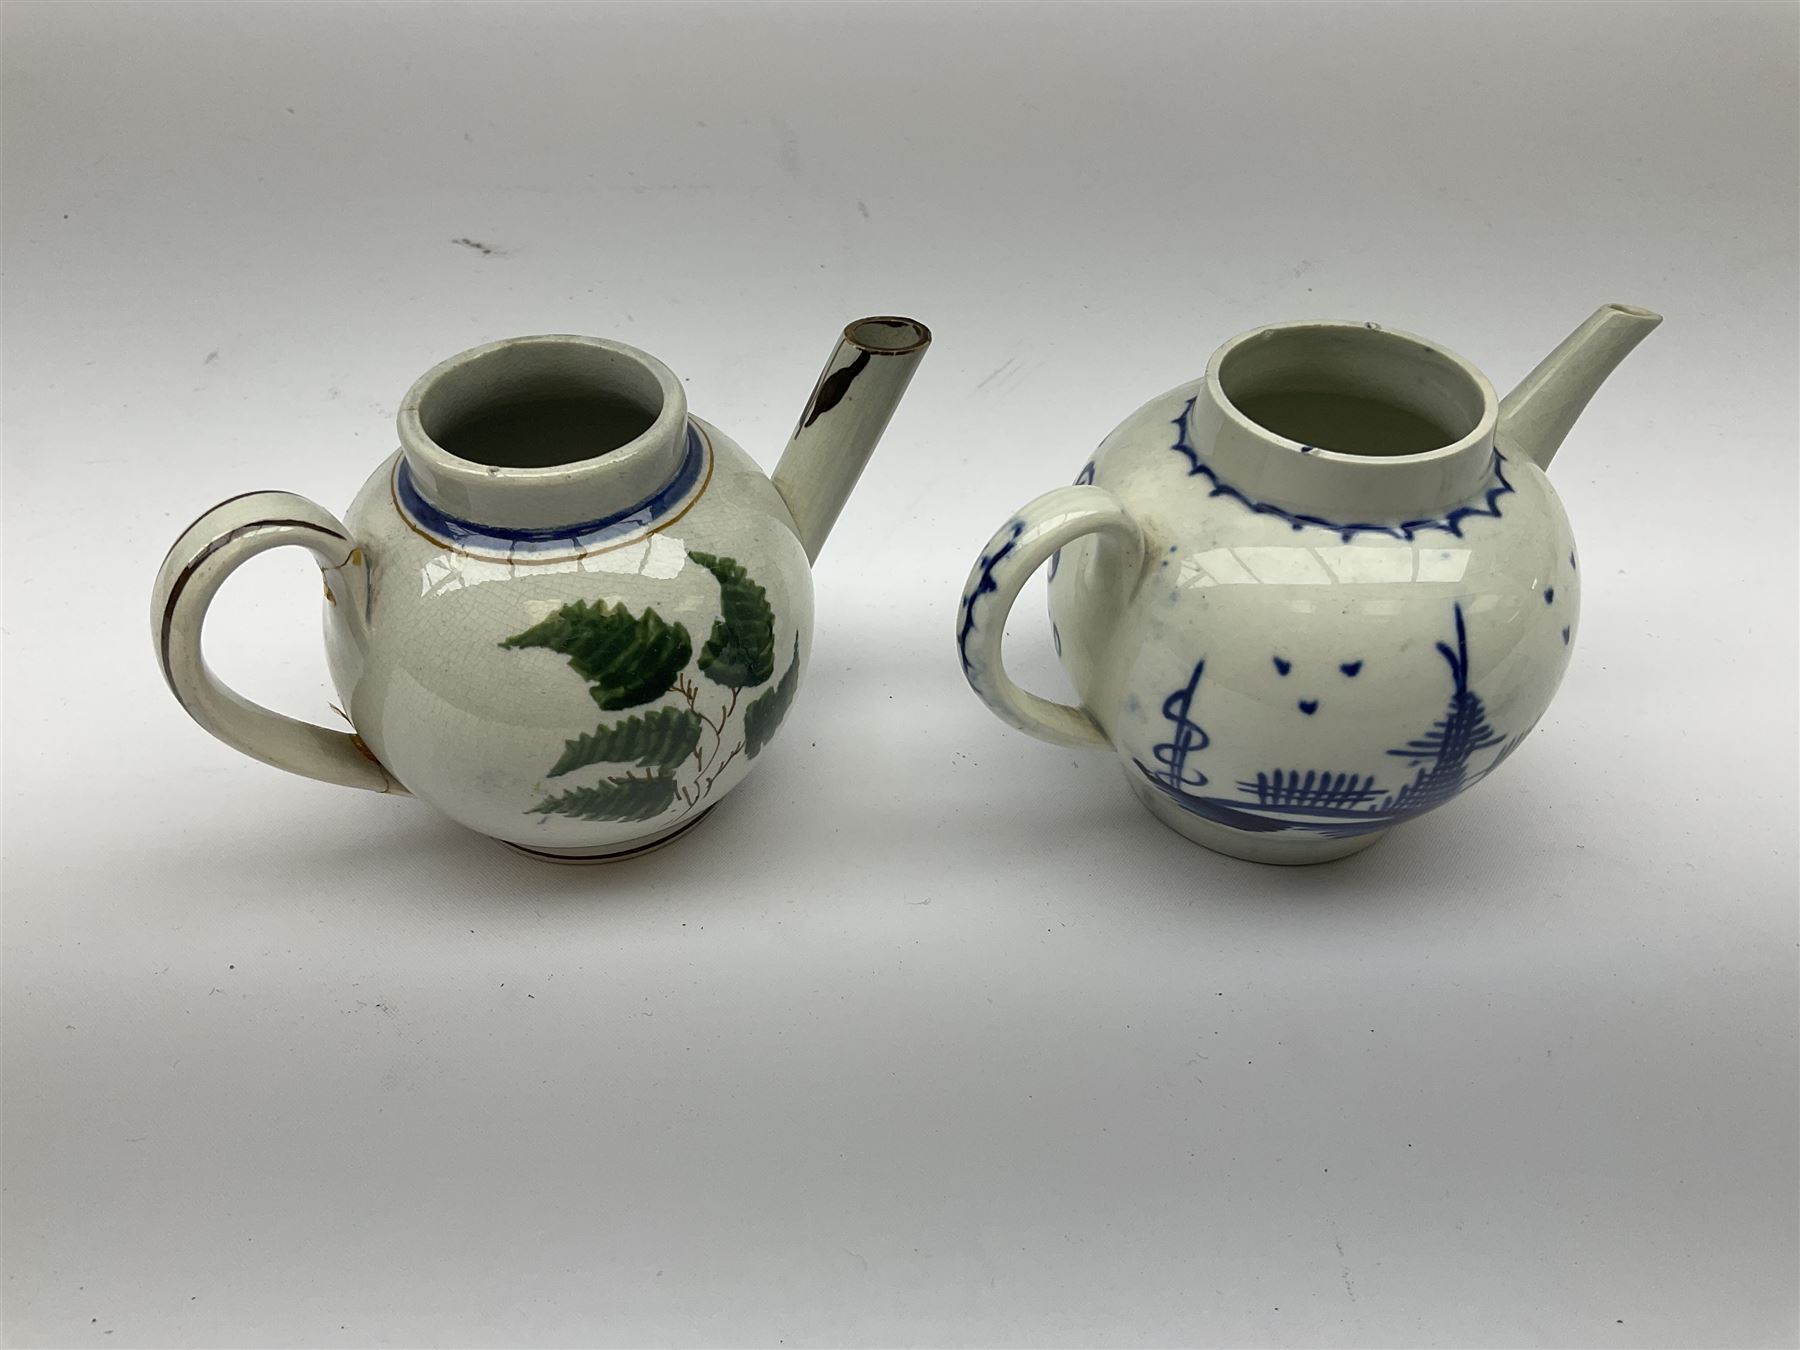 Two 18th century miniature or toy pearlware teapots - Image 5 of 8